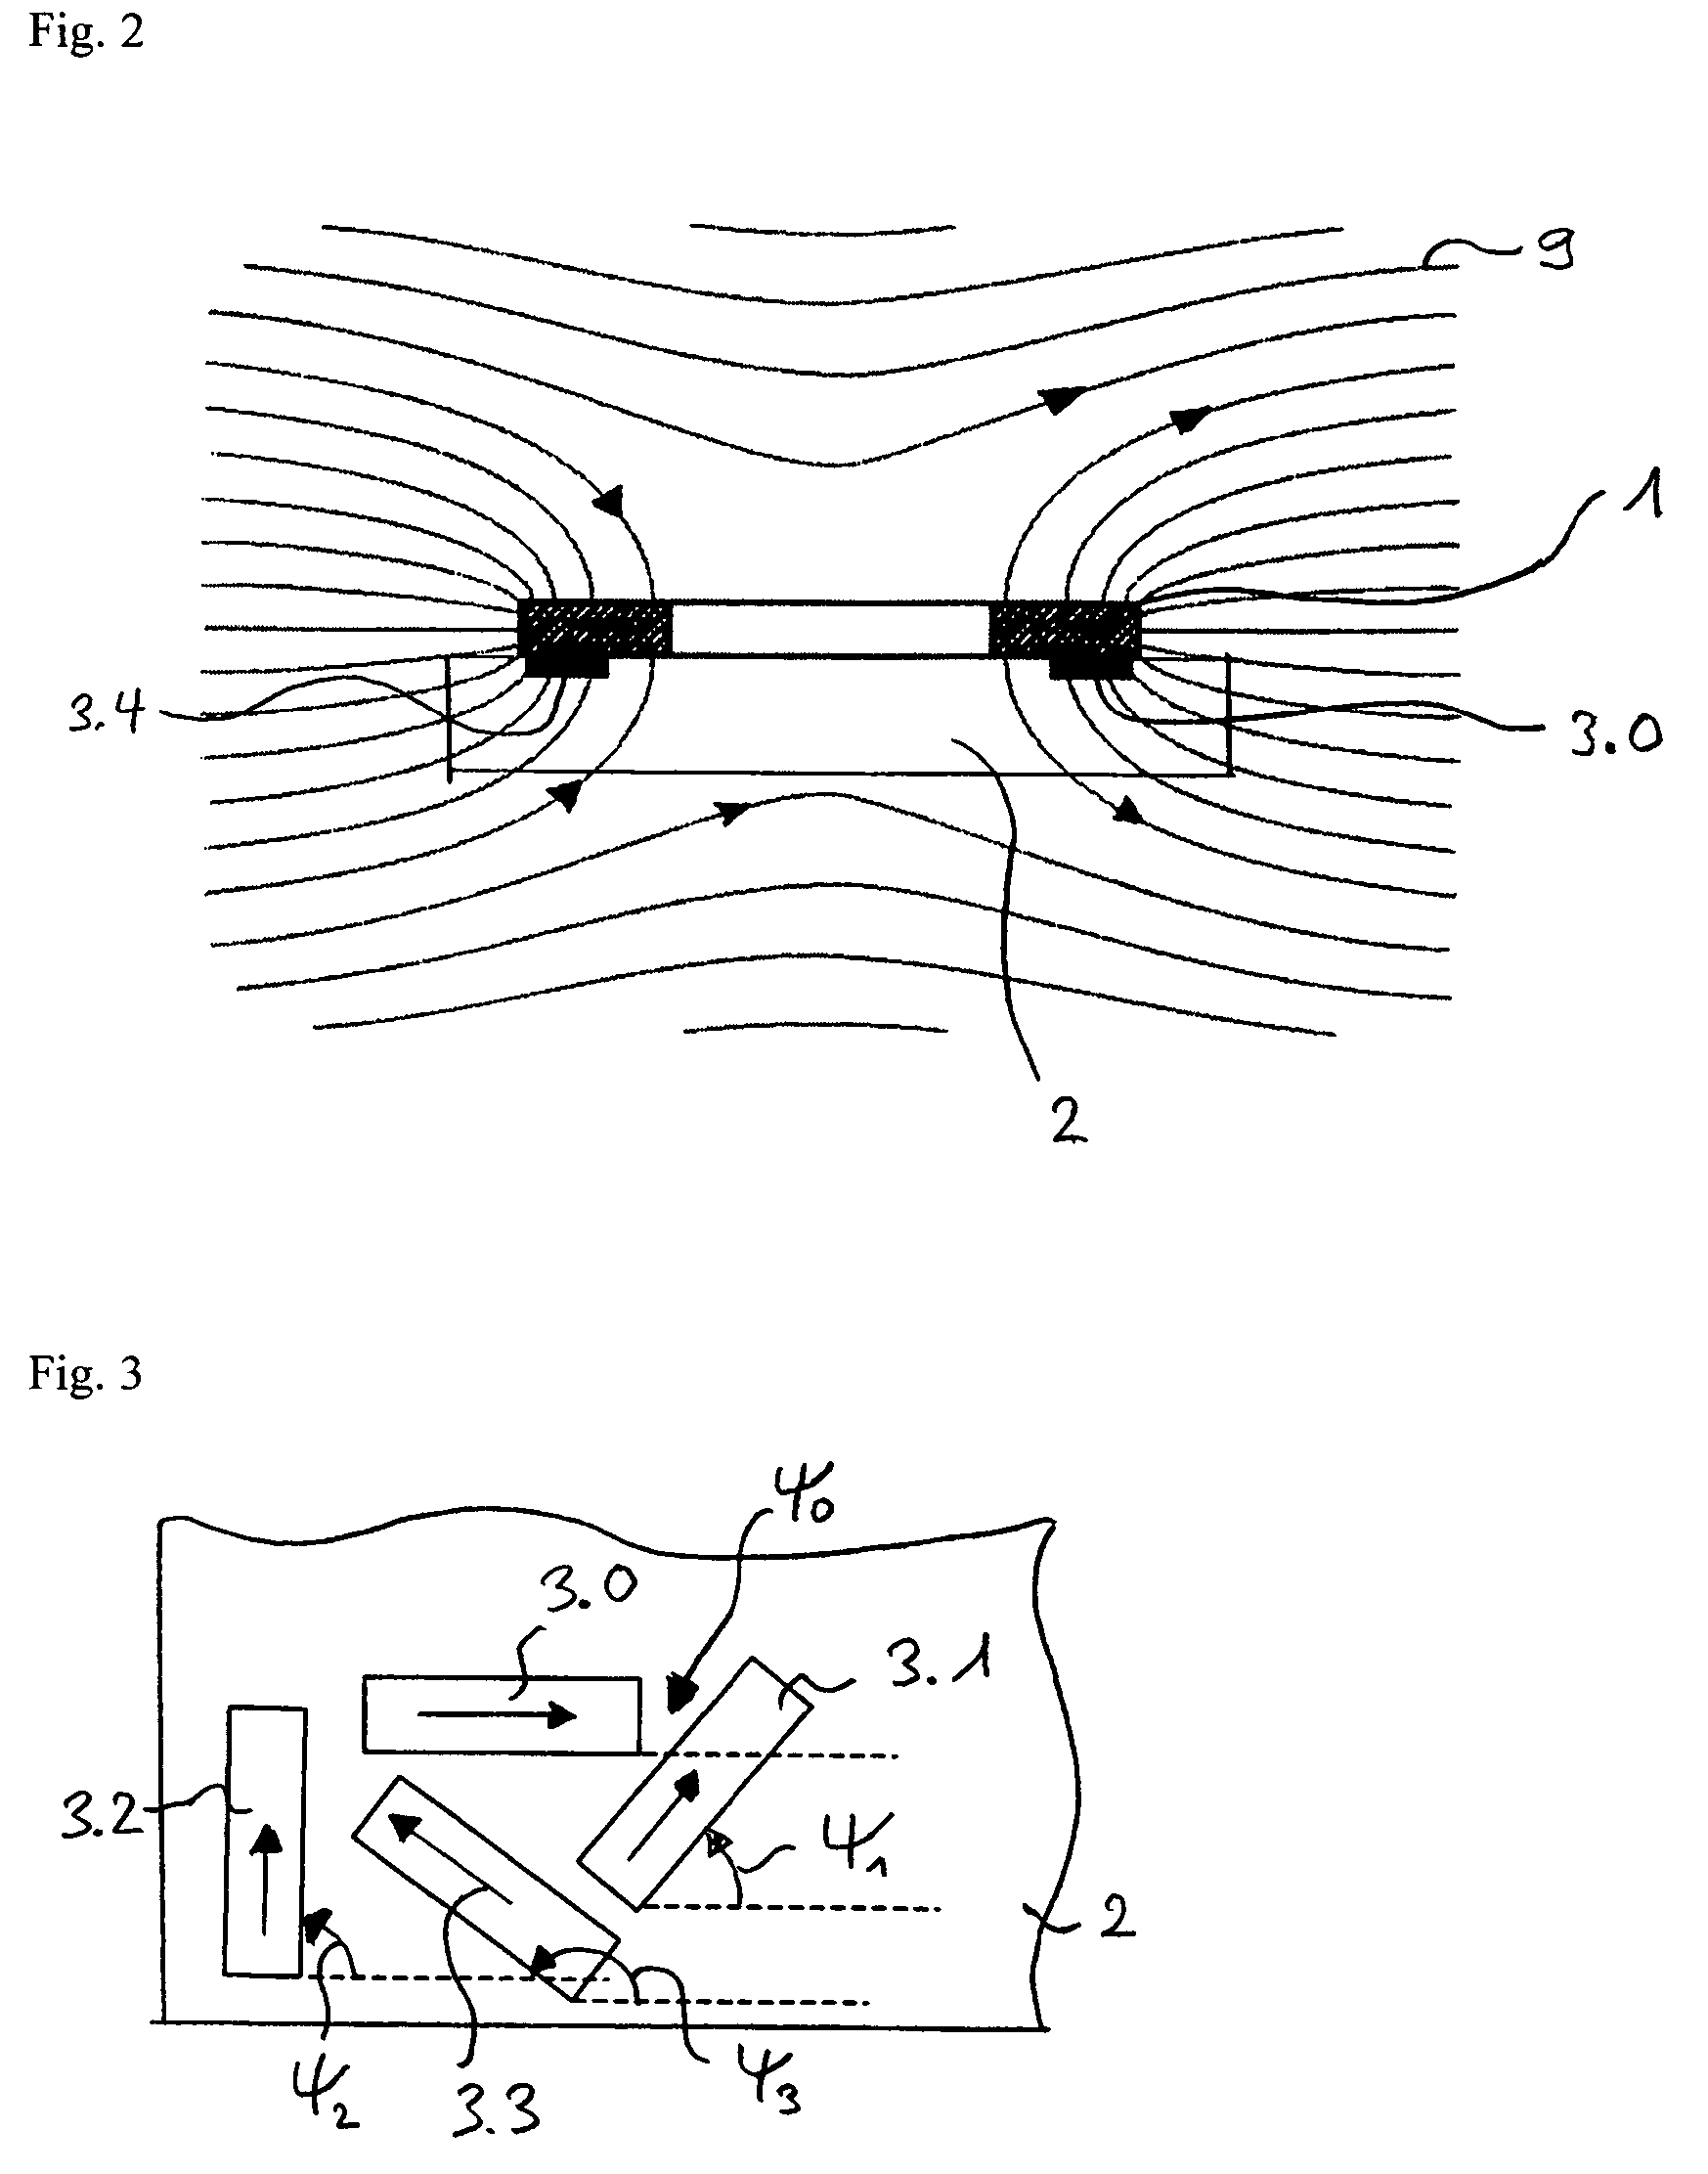 Sensor for detecting the direction of a magnetic field in a plane